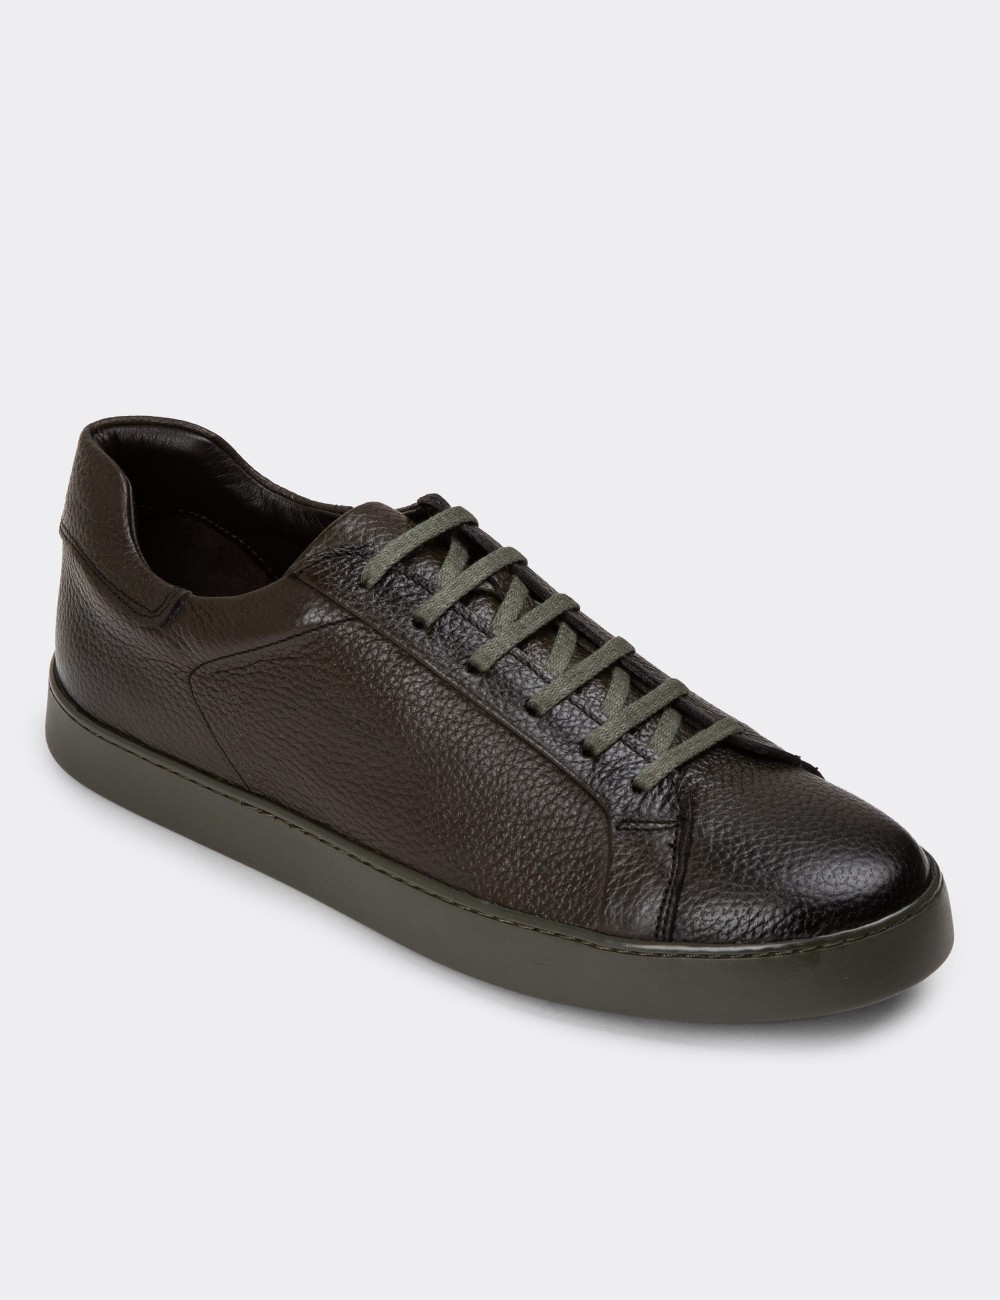 Green Suede Leather Sneakers - 01955MHAKC01